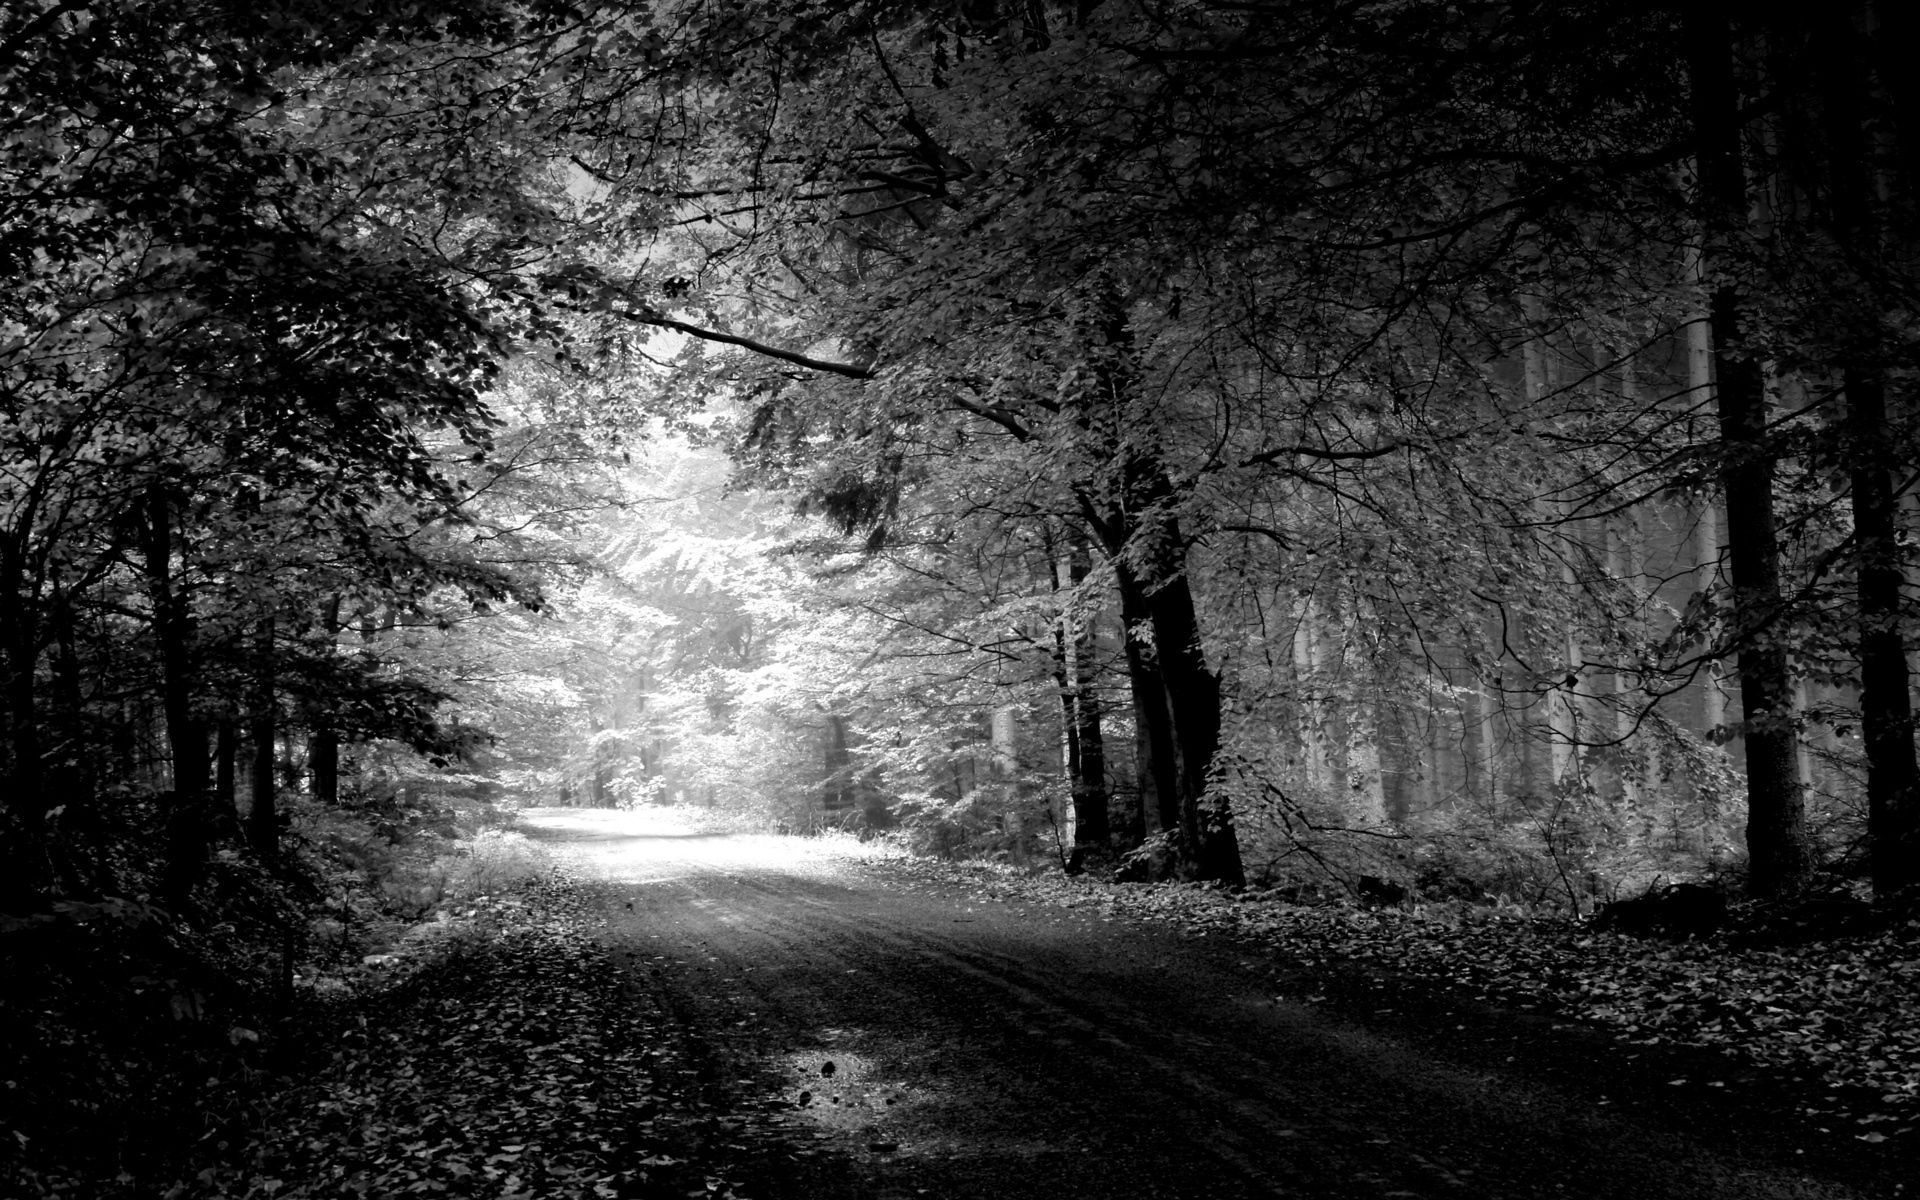 black and white, nature, trees, autumn, road, puddle